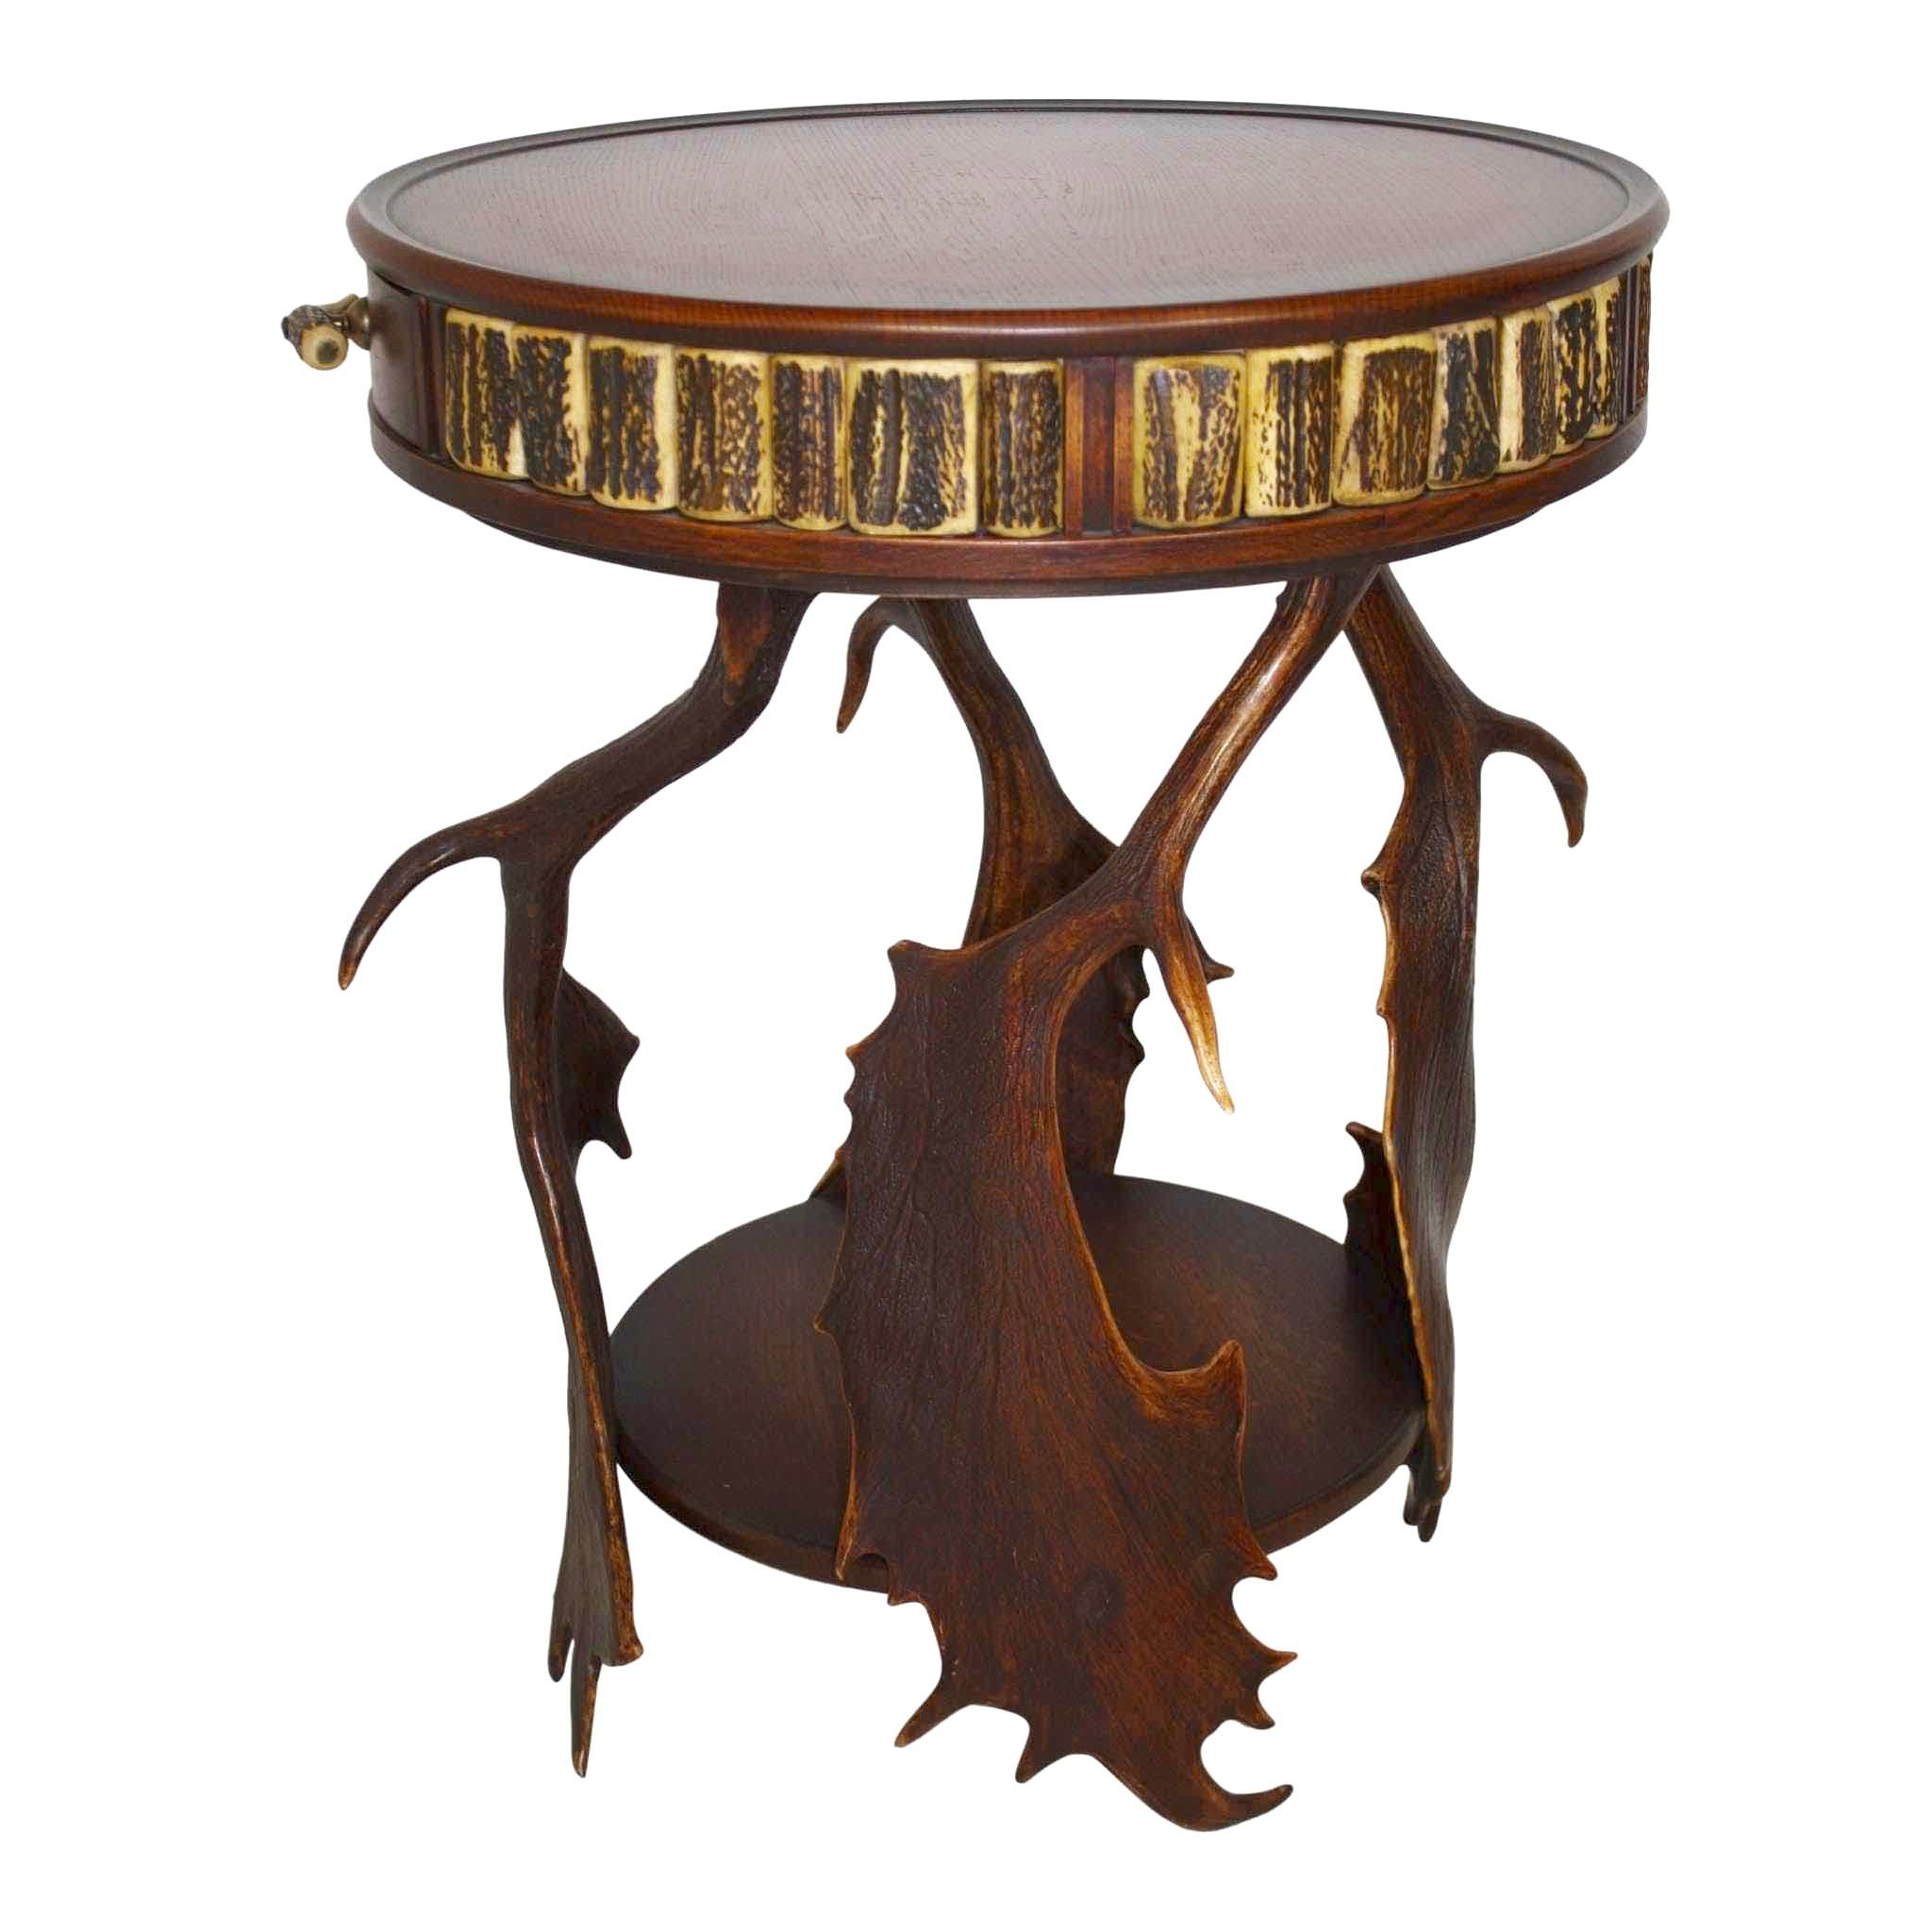 Designed by artist Brad Ham using fallow deer antlers from Europe, these tables are an impressive way to bring the look of nature to your home or business. The legs are fashioned from four antlers, which are joined near the bottom by a lower tier.